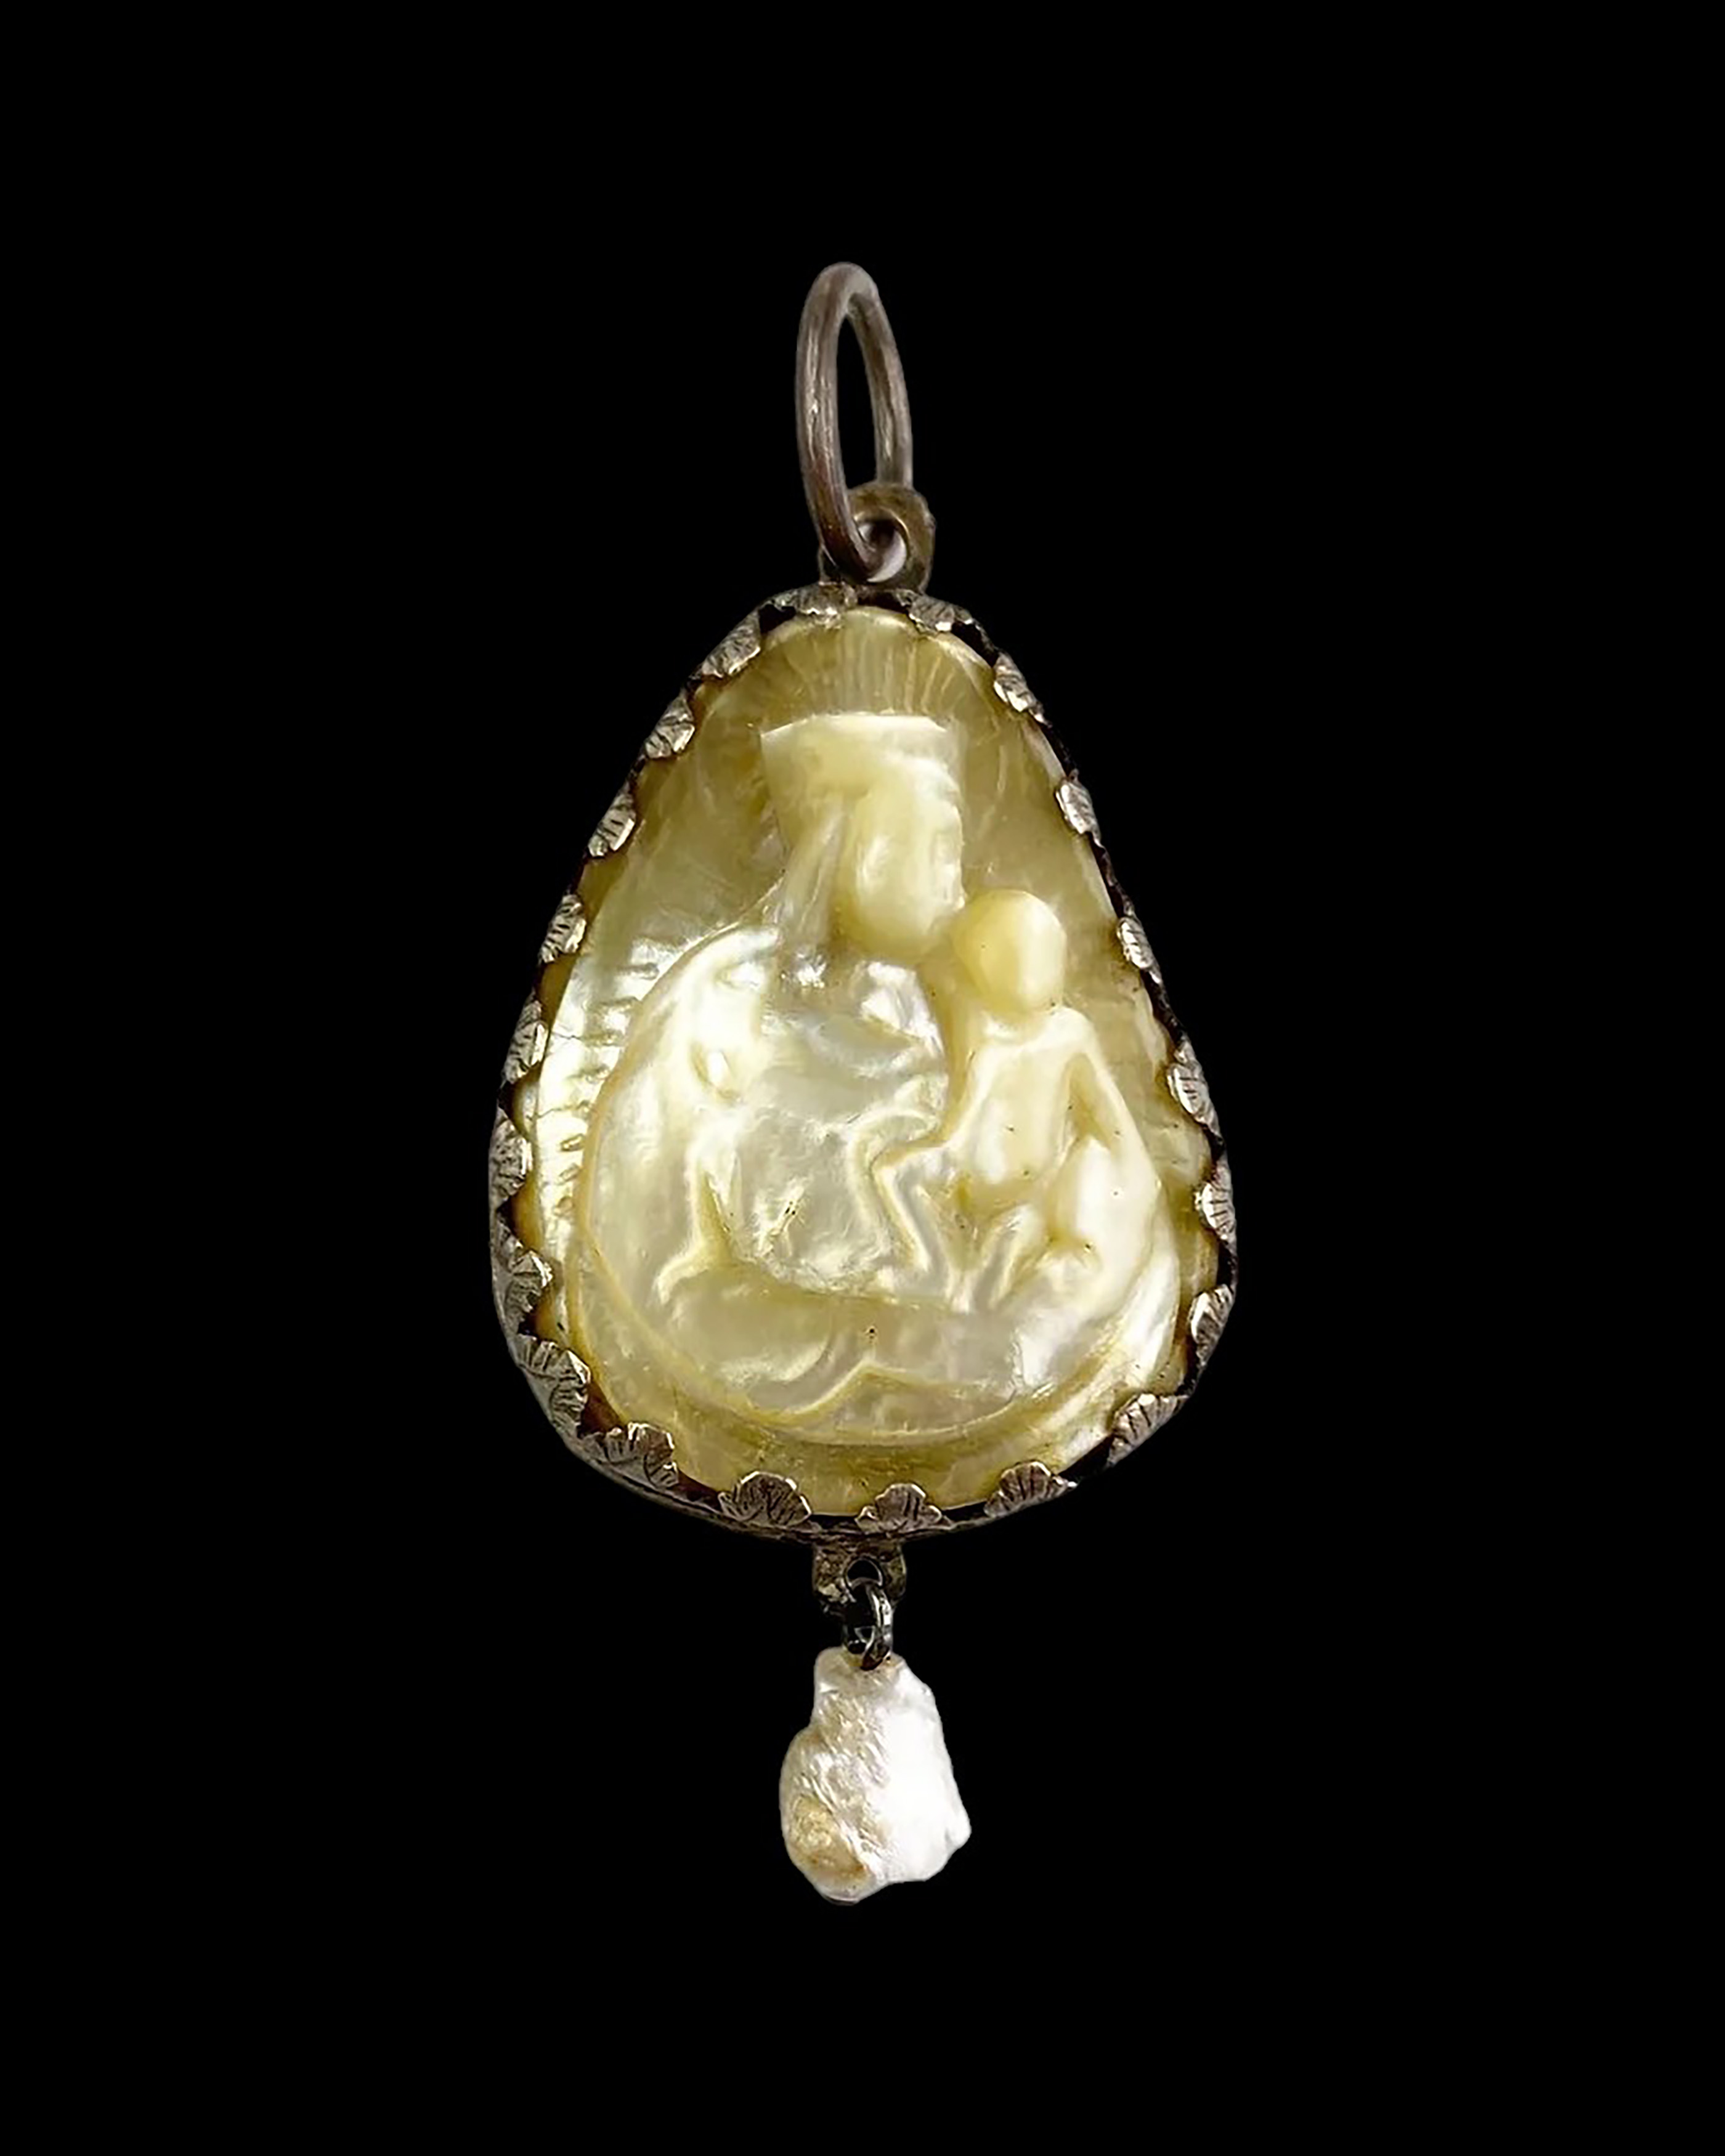 Mother-of-pearl cameo pendant of the Virgin and Child. German, 15th century.